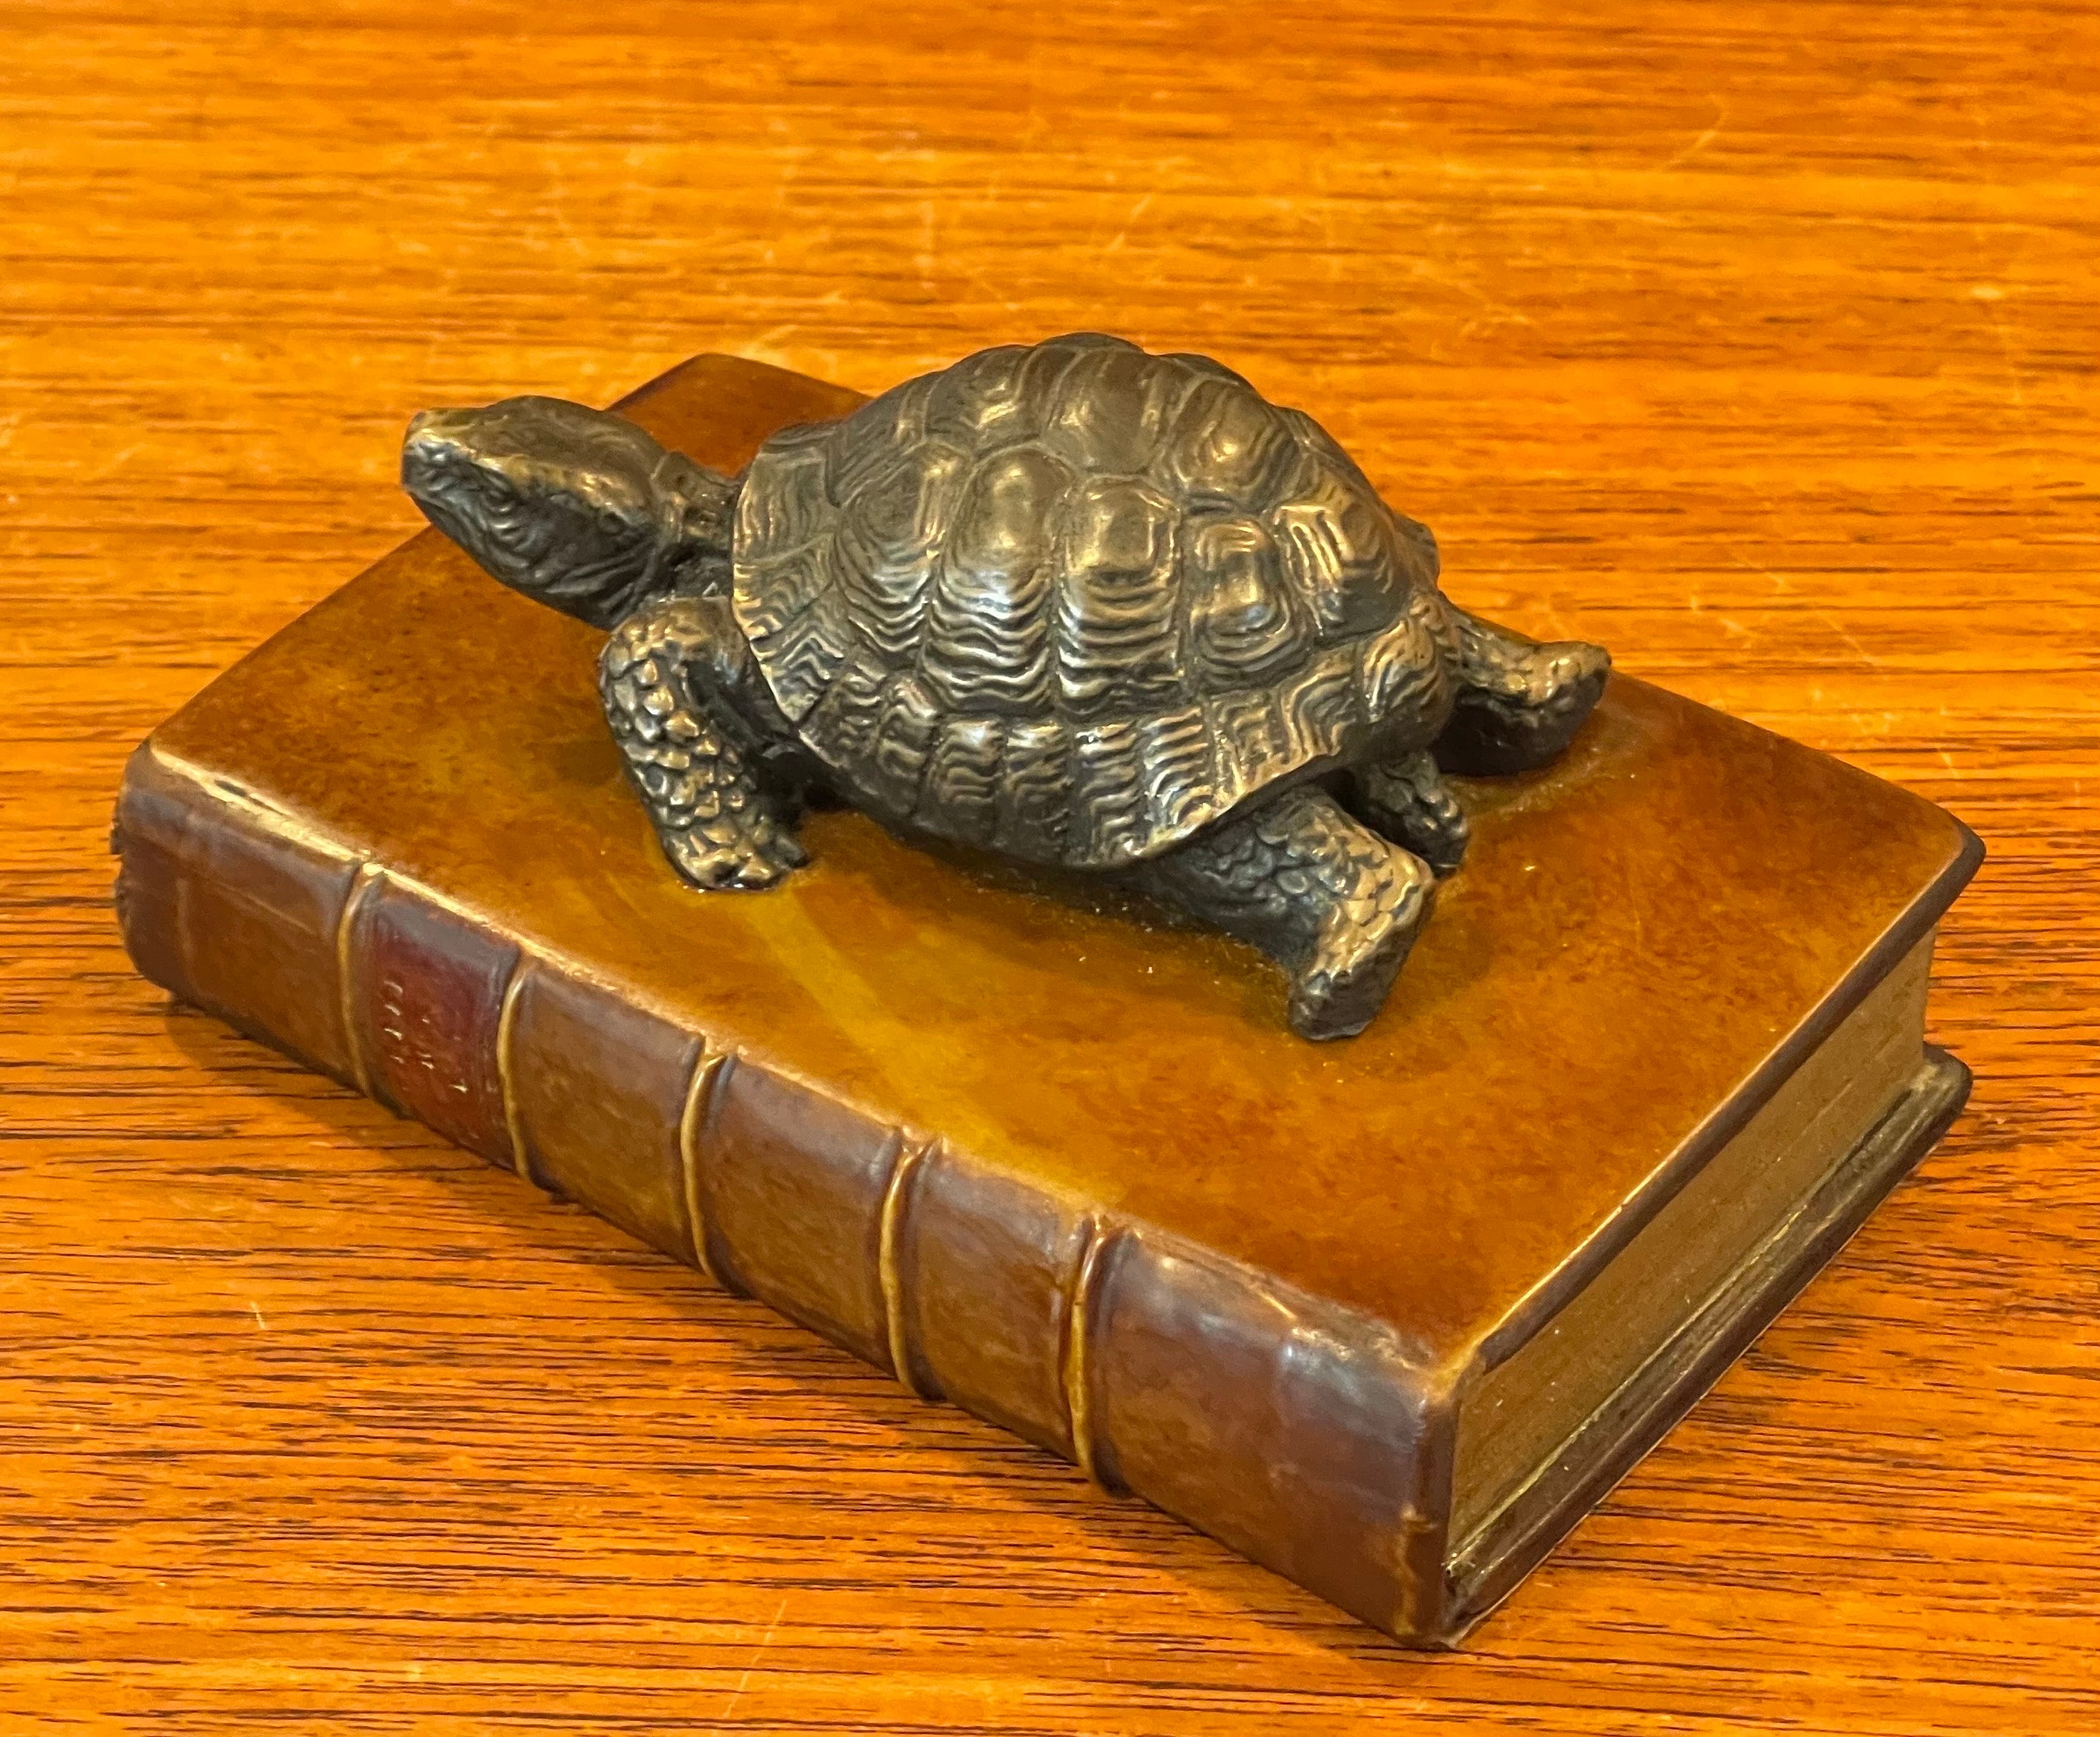 Unique vintage brass turtle on faux book paperweight, circa 1970s. The piece is in very good vintage condition and measures 5.25